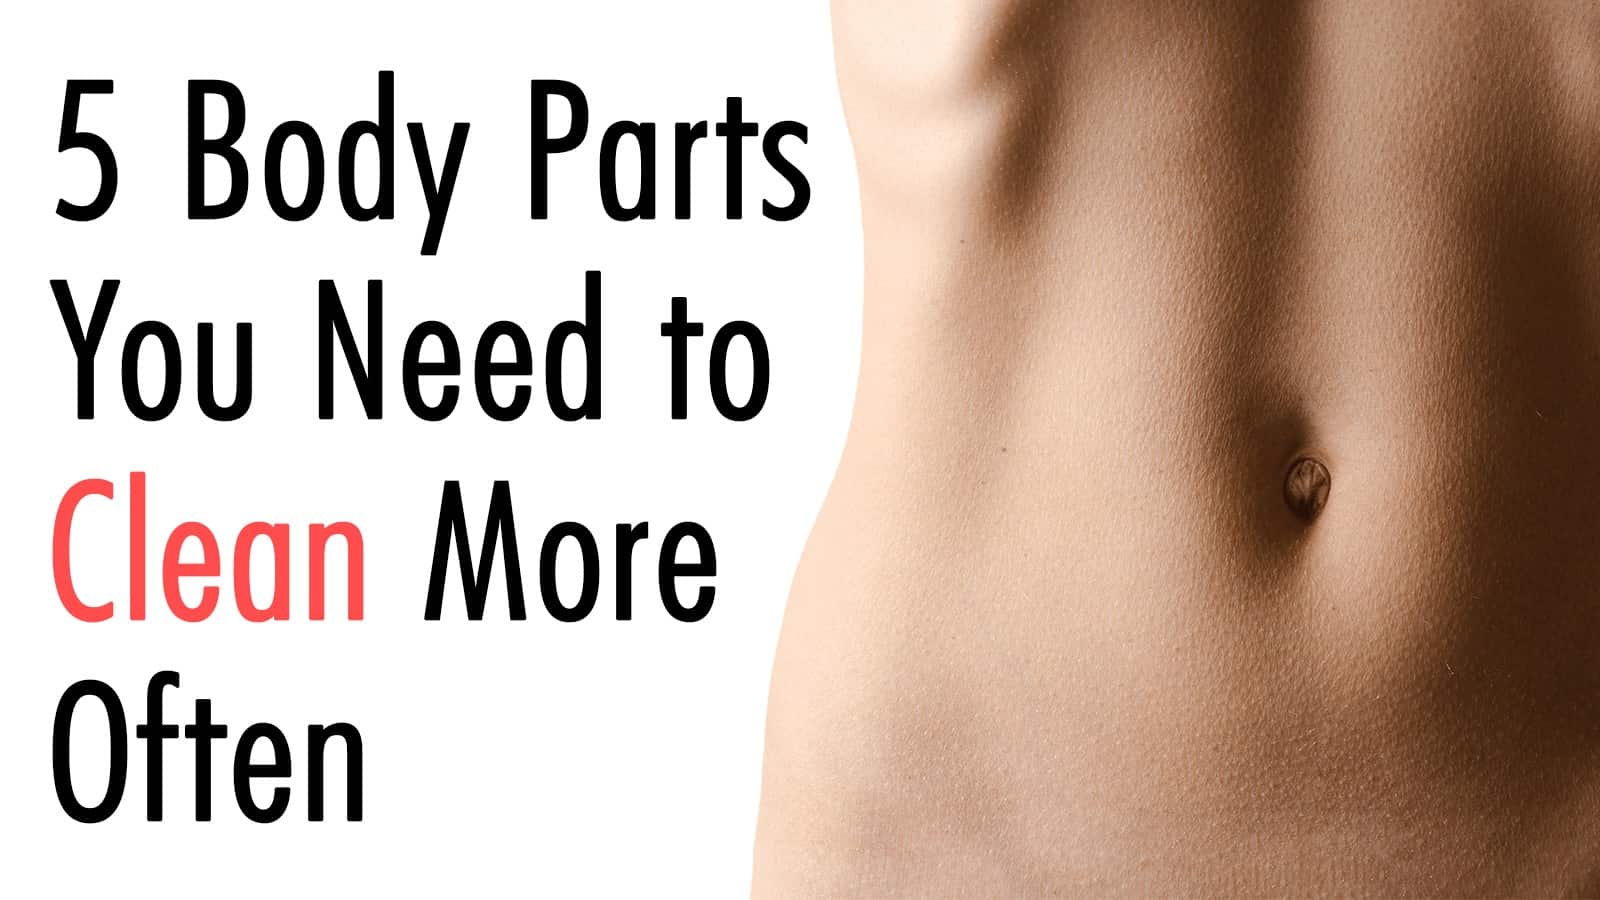 5 Body Parts You Need to Clean More Often